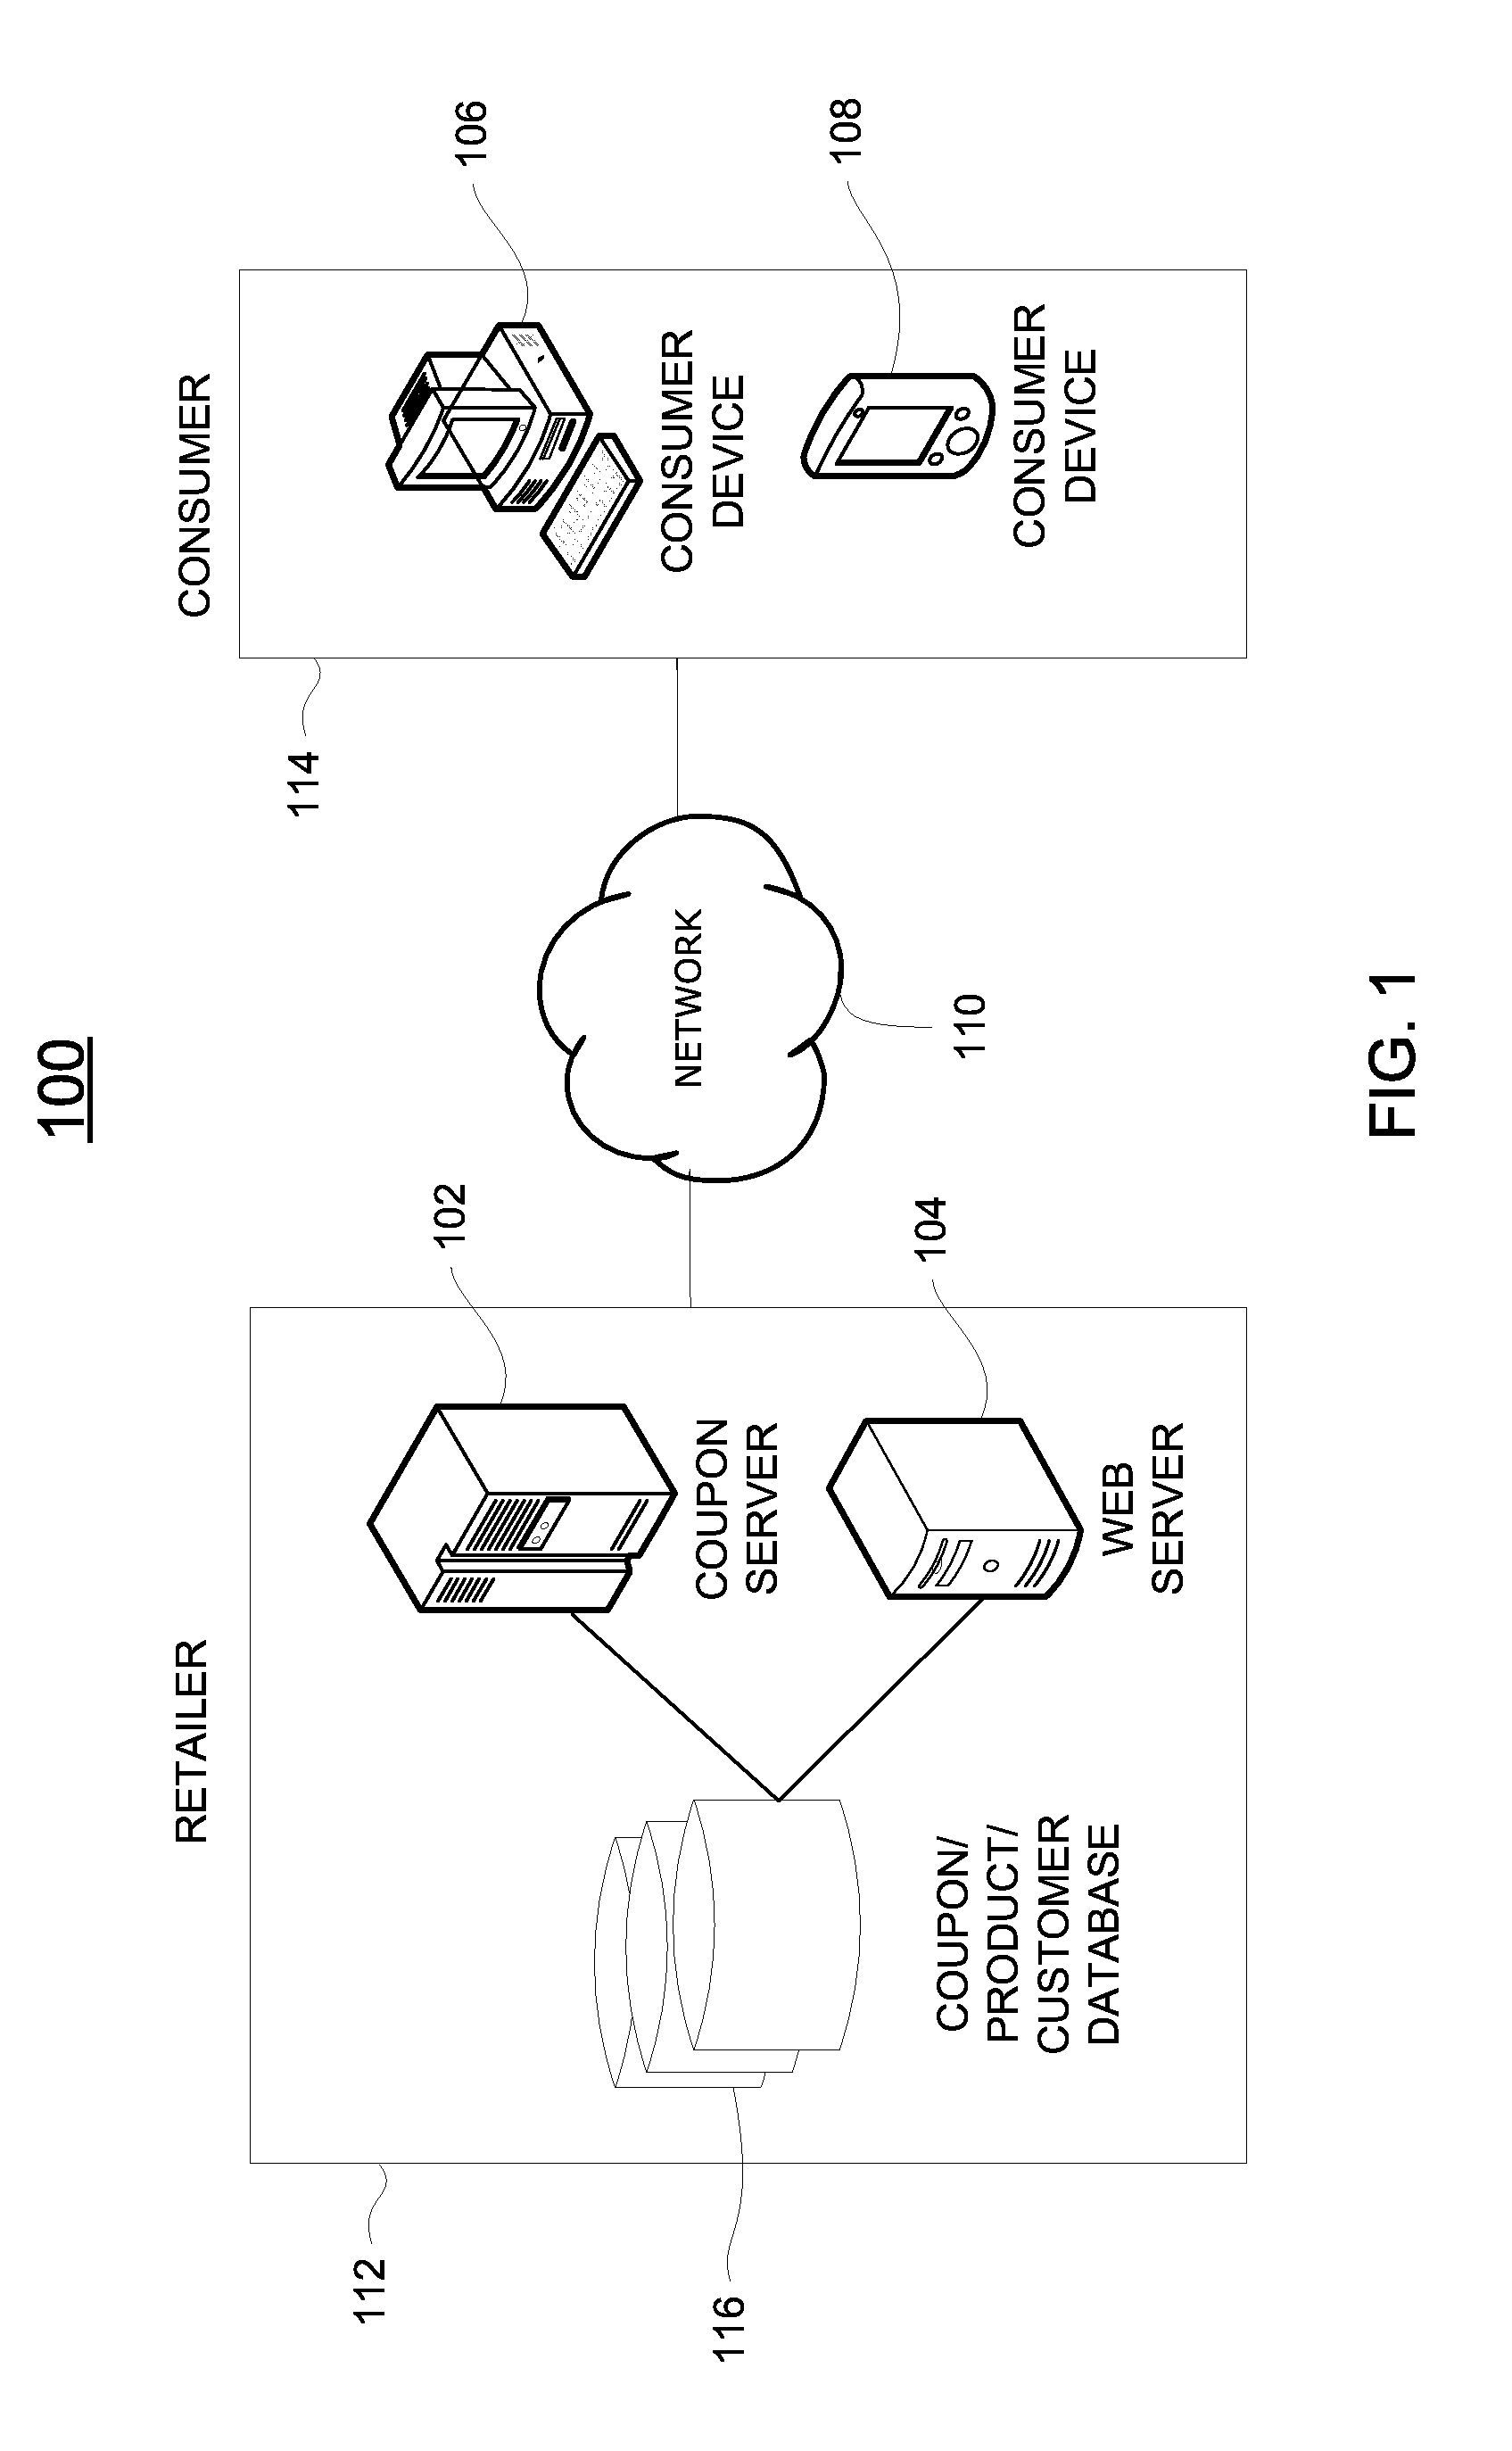 Systems and methods for processing coupons